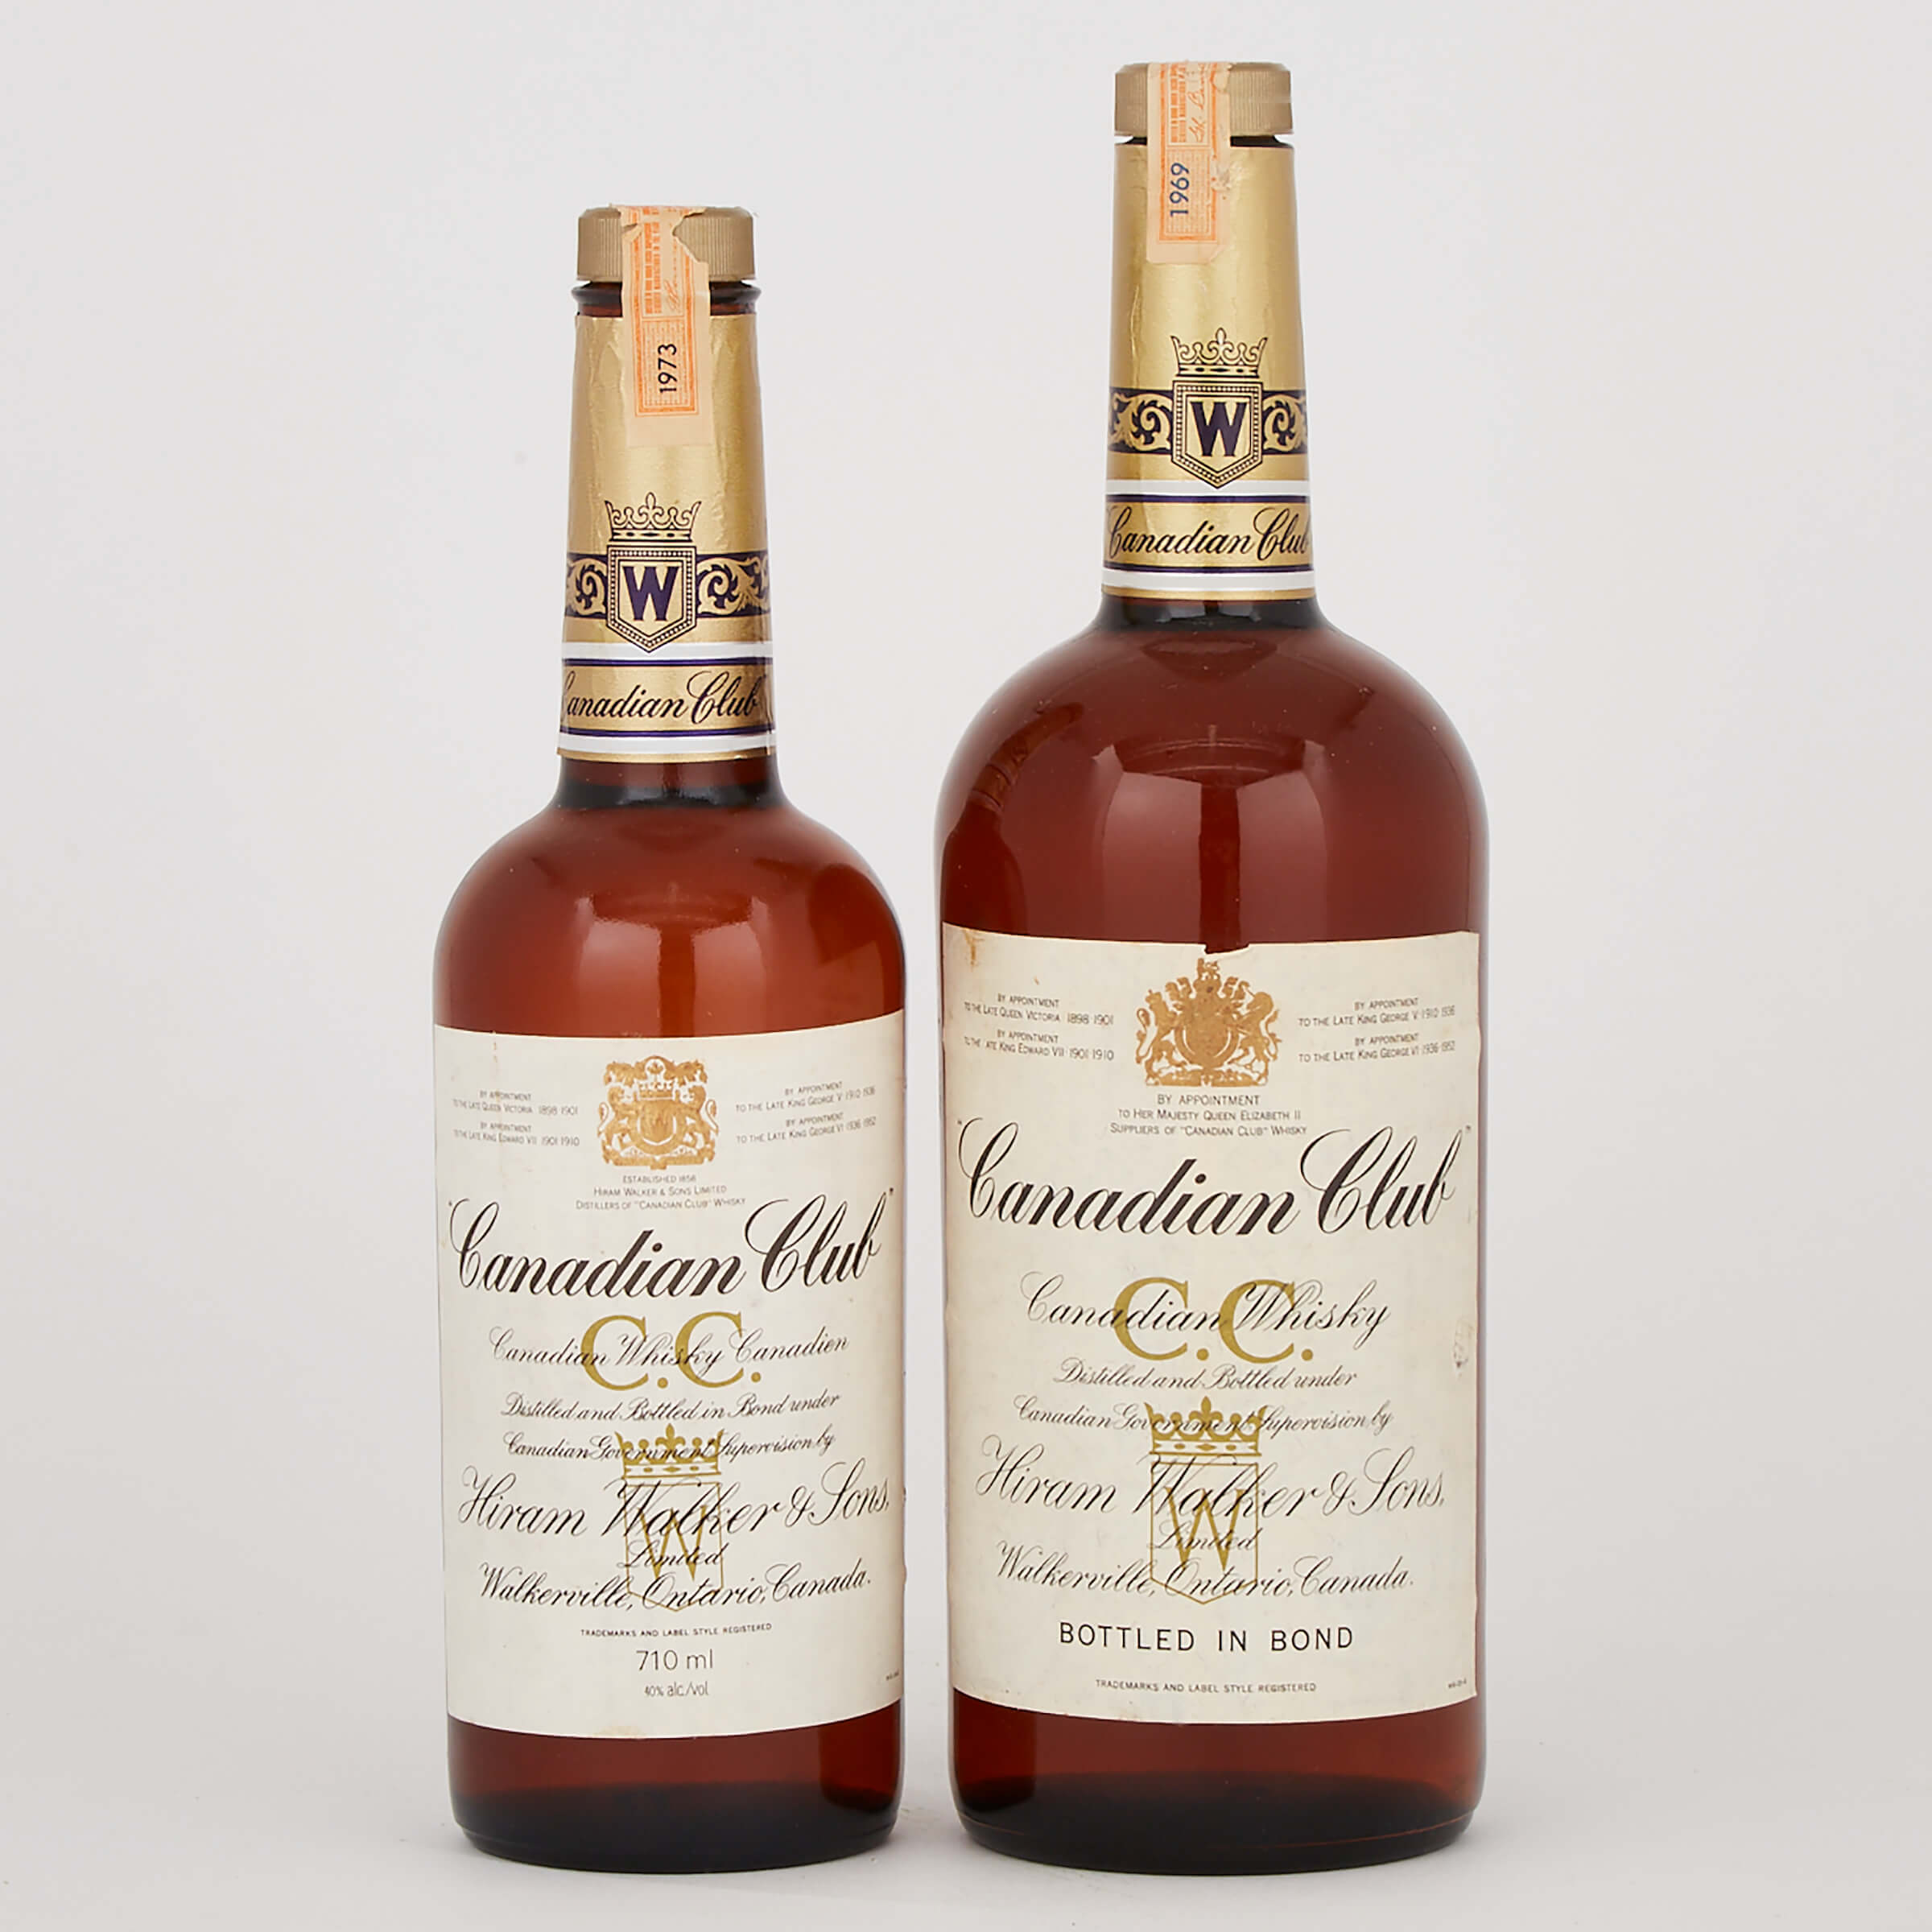 CANADIAN CLUB CANADIAN WHISKY (ONE 1000 ML)
CANADIAN CLUB CANADIAN WHISKY (ONE 710 ML)